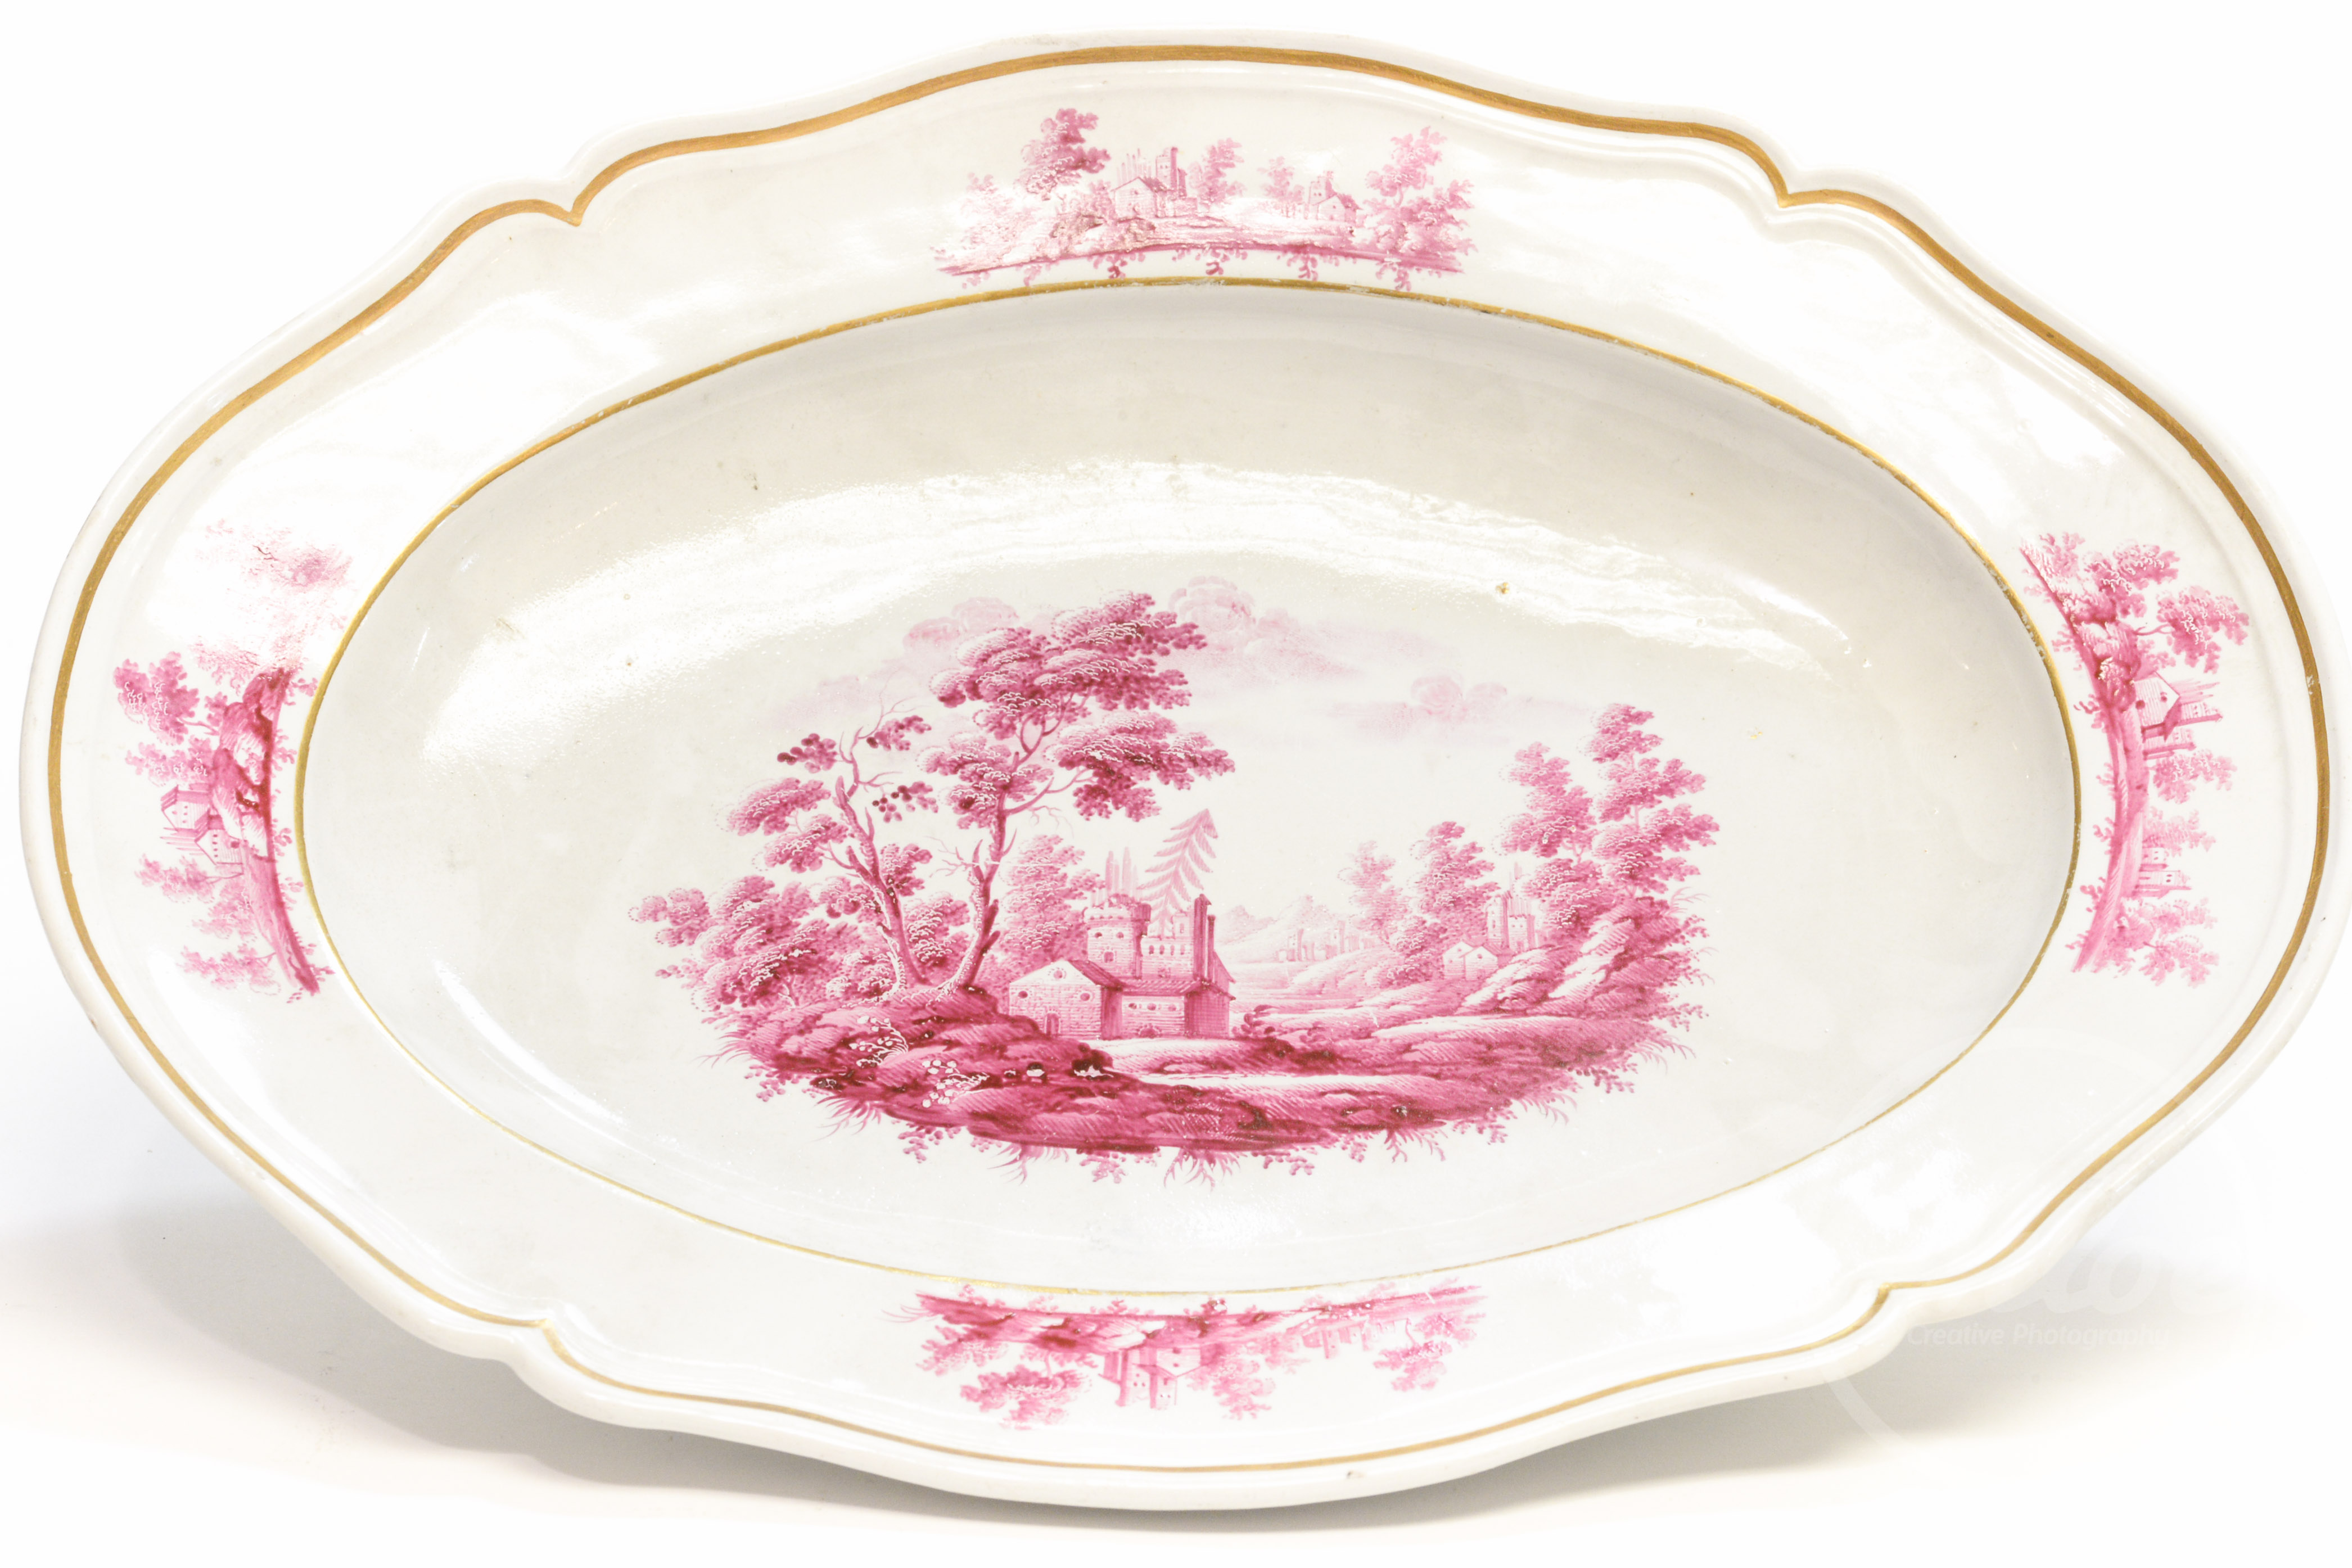 An 18th century porcelain platter, probably Continental,